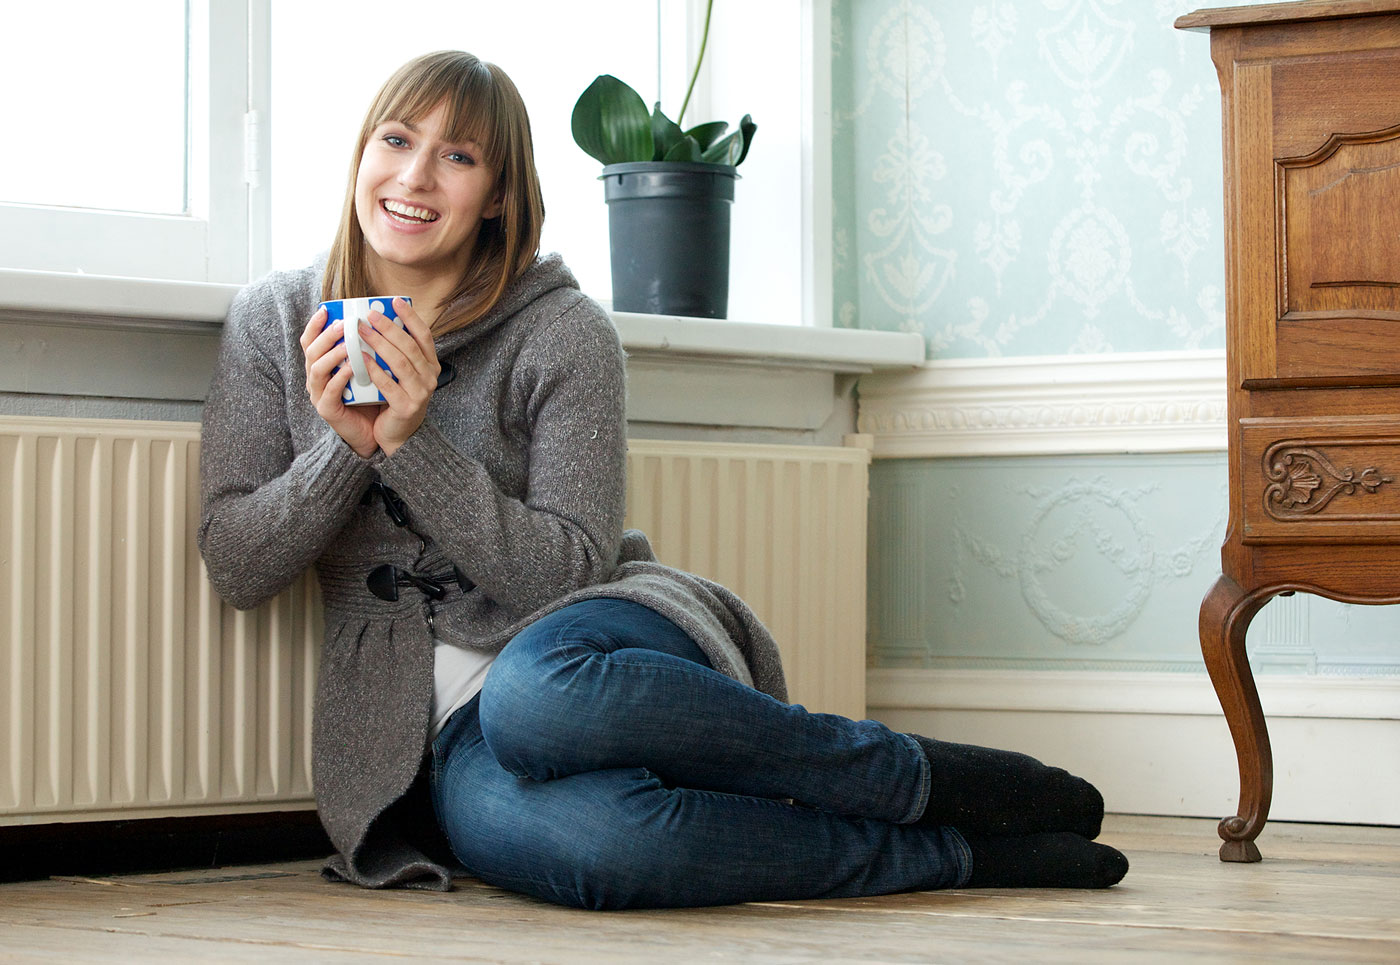 One of our happy customers with her repaired central heating.